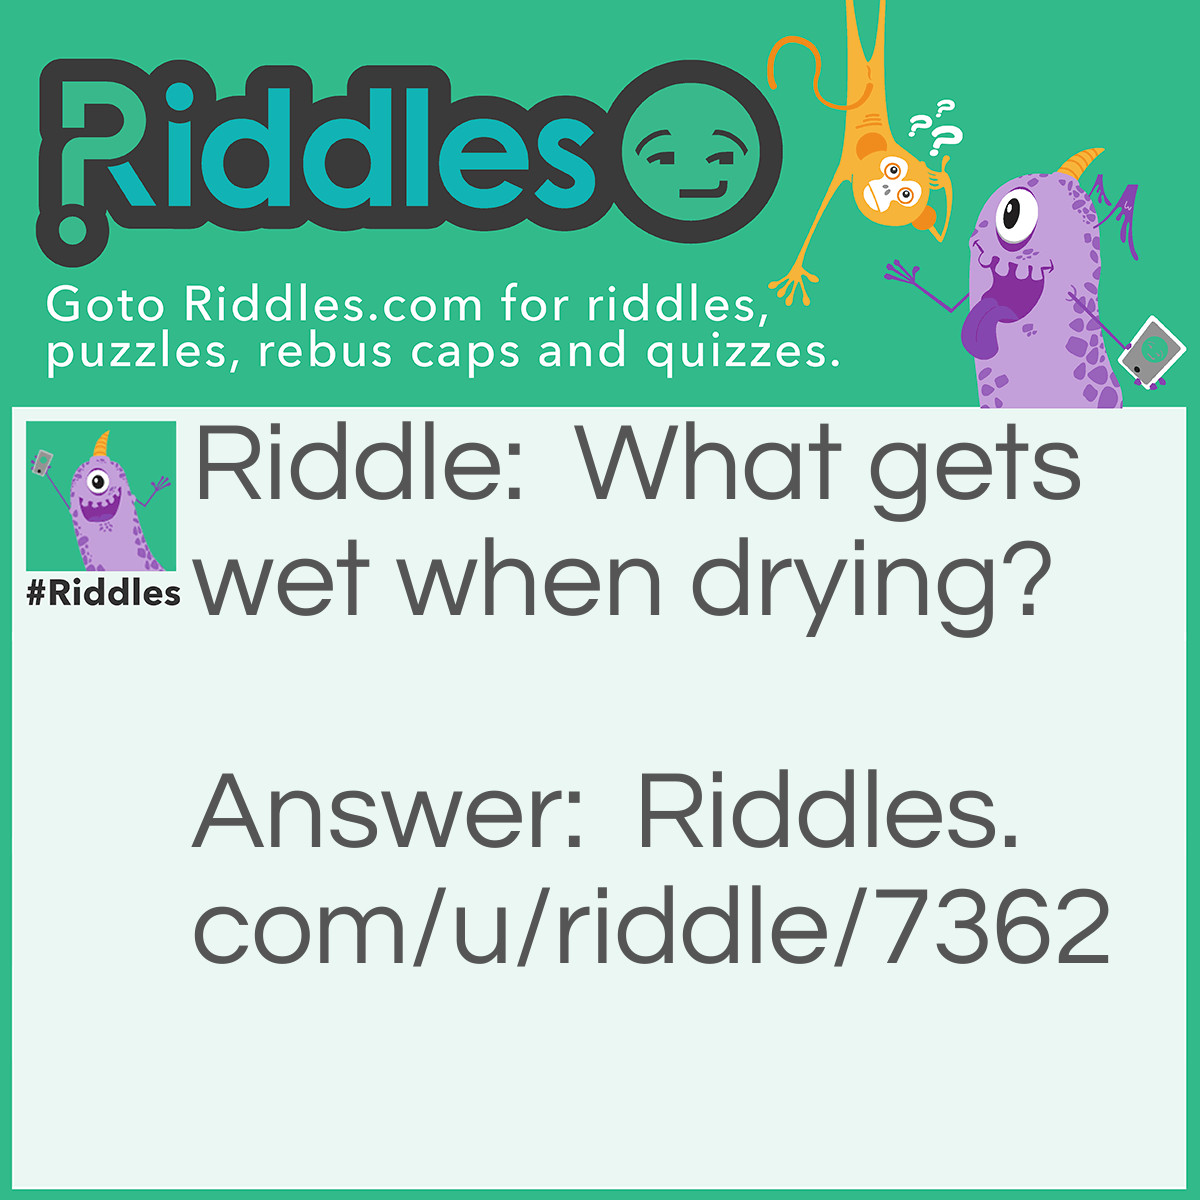 Riddle: What gets wet when drying? Answer: A towel!